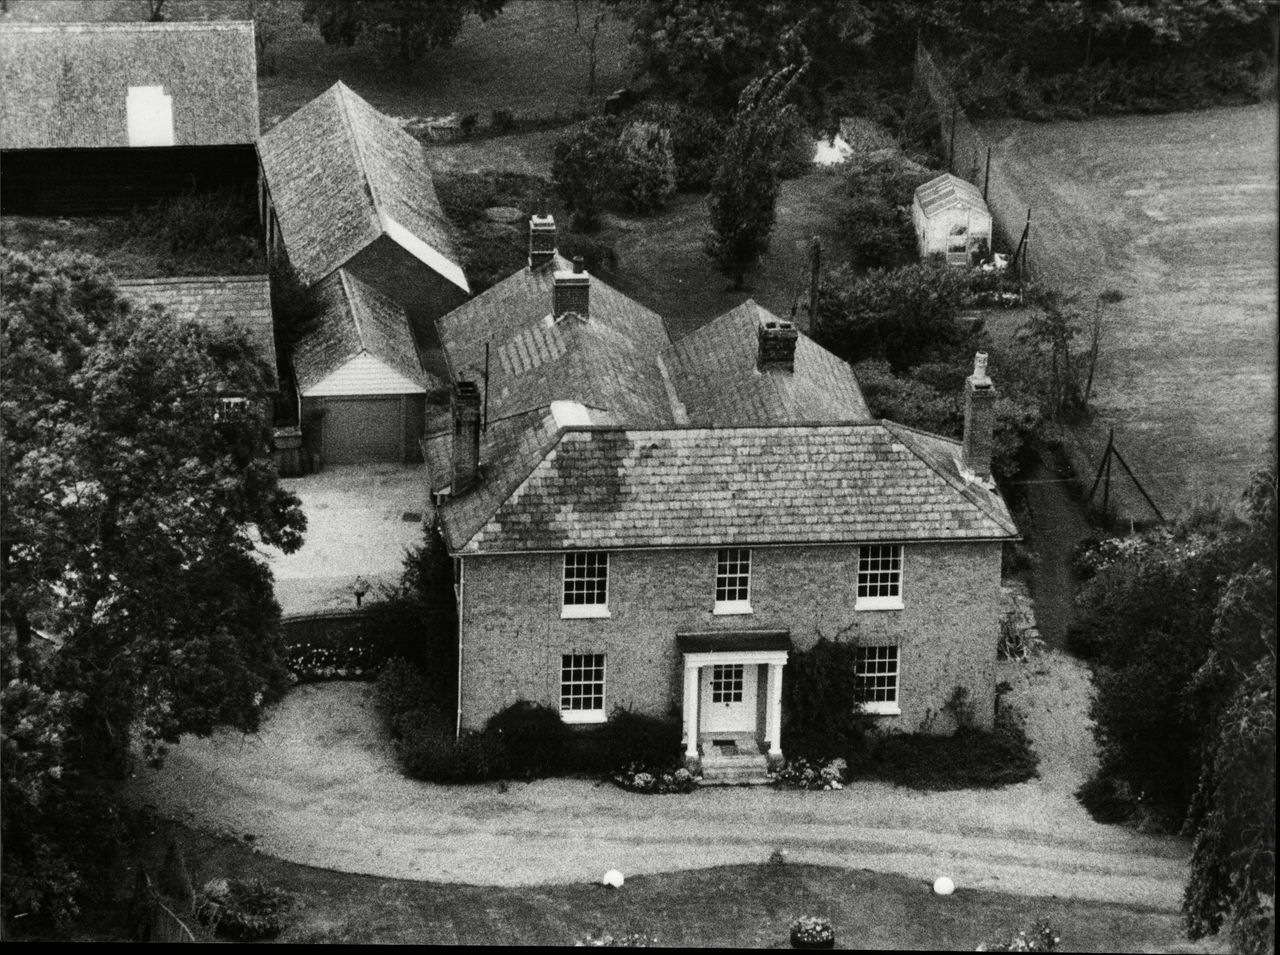 An aerial view of White House Farm in Tolleshunt D'arcy, Essex 